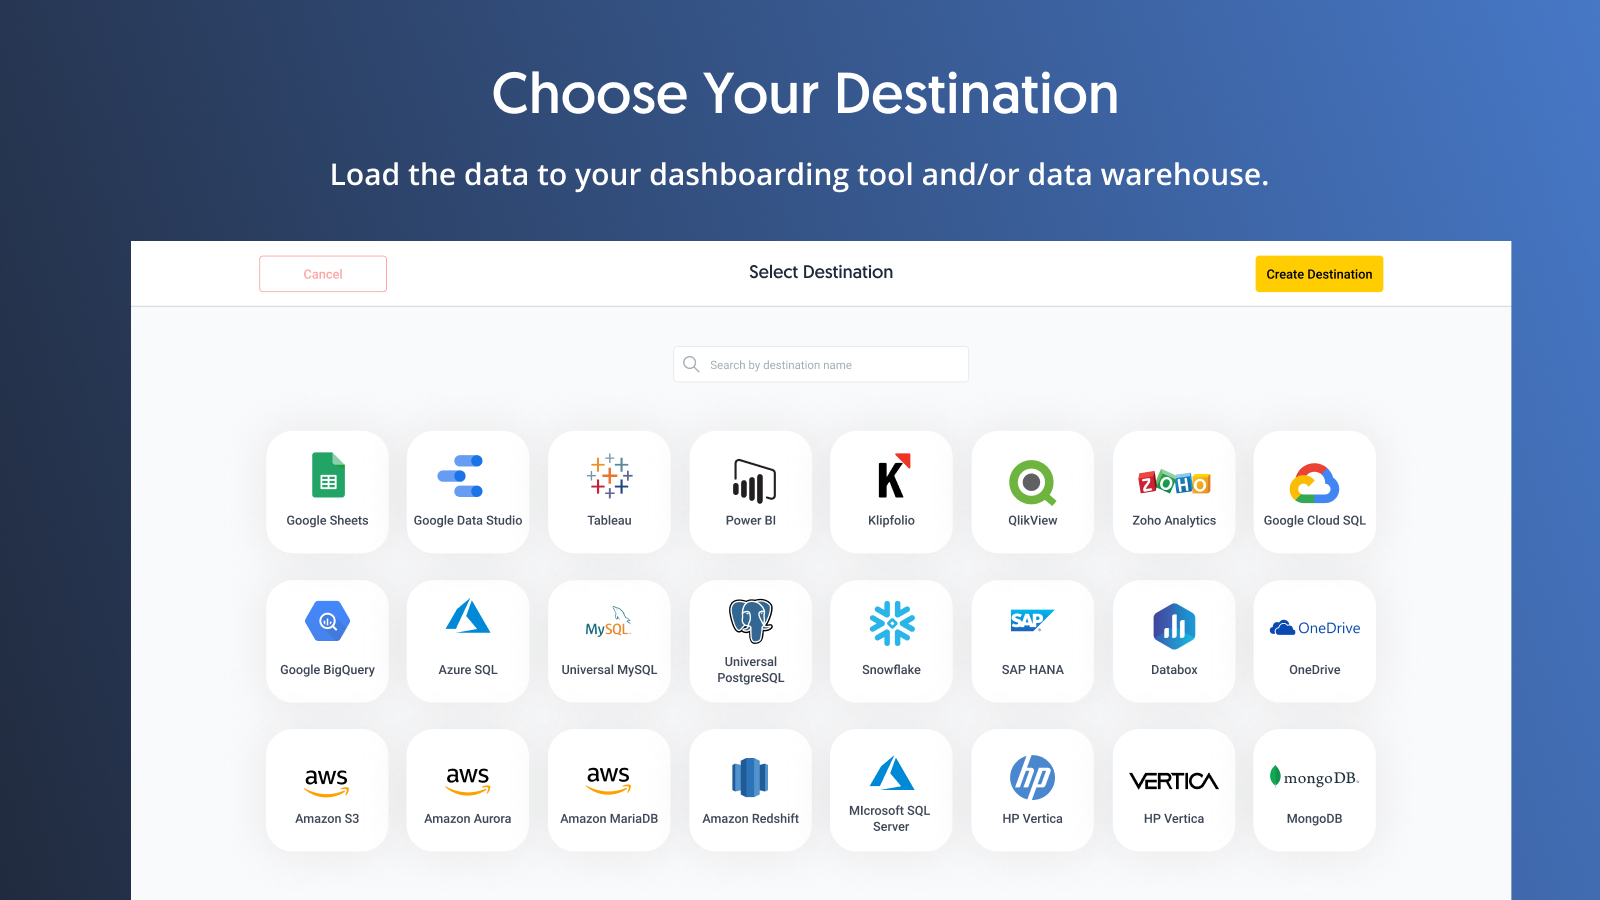 Choose your any and all of your destinations, whether that's a dashboarding tool or data warehouse.